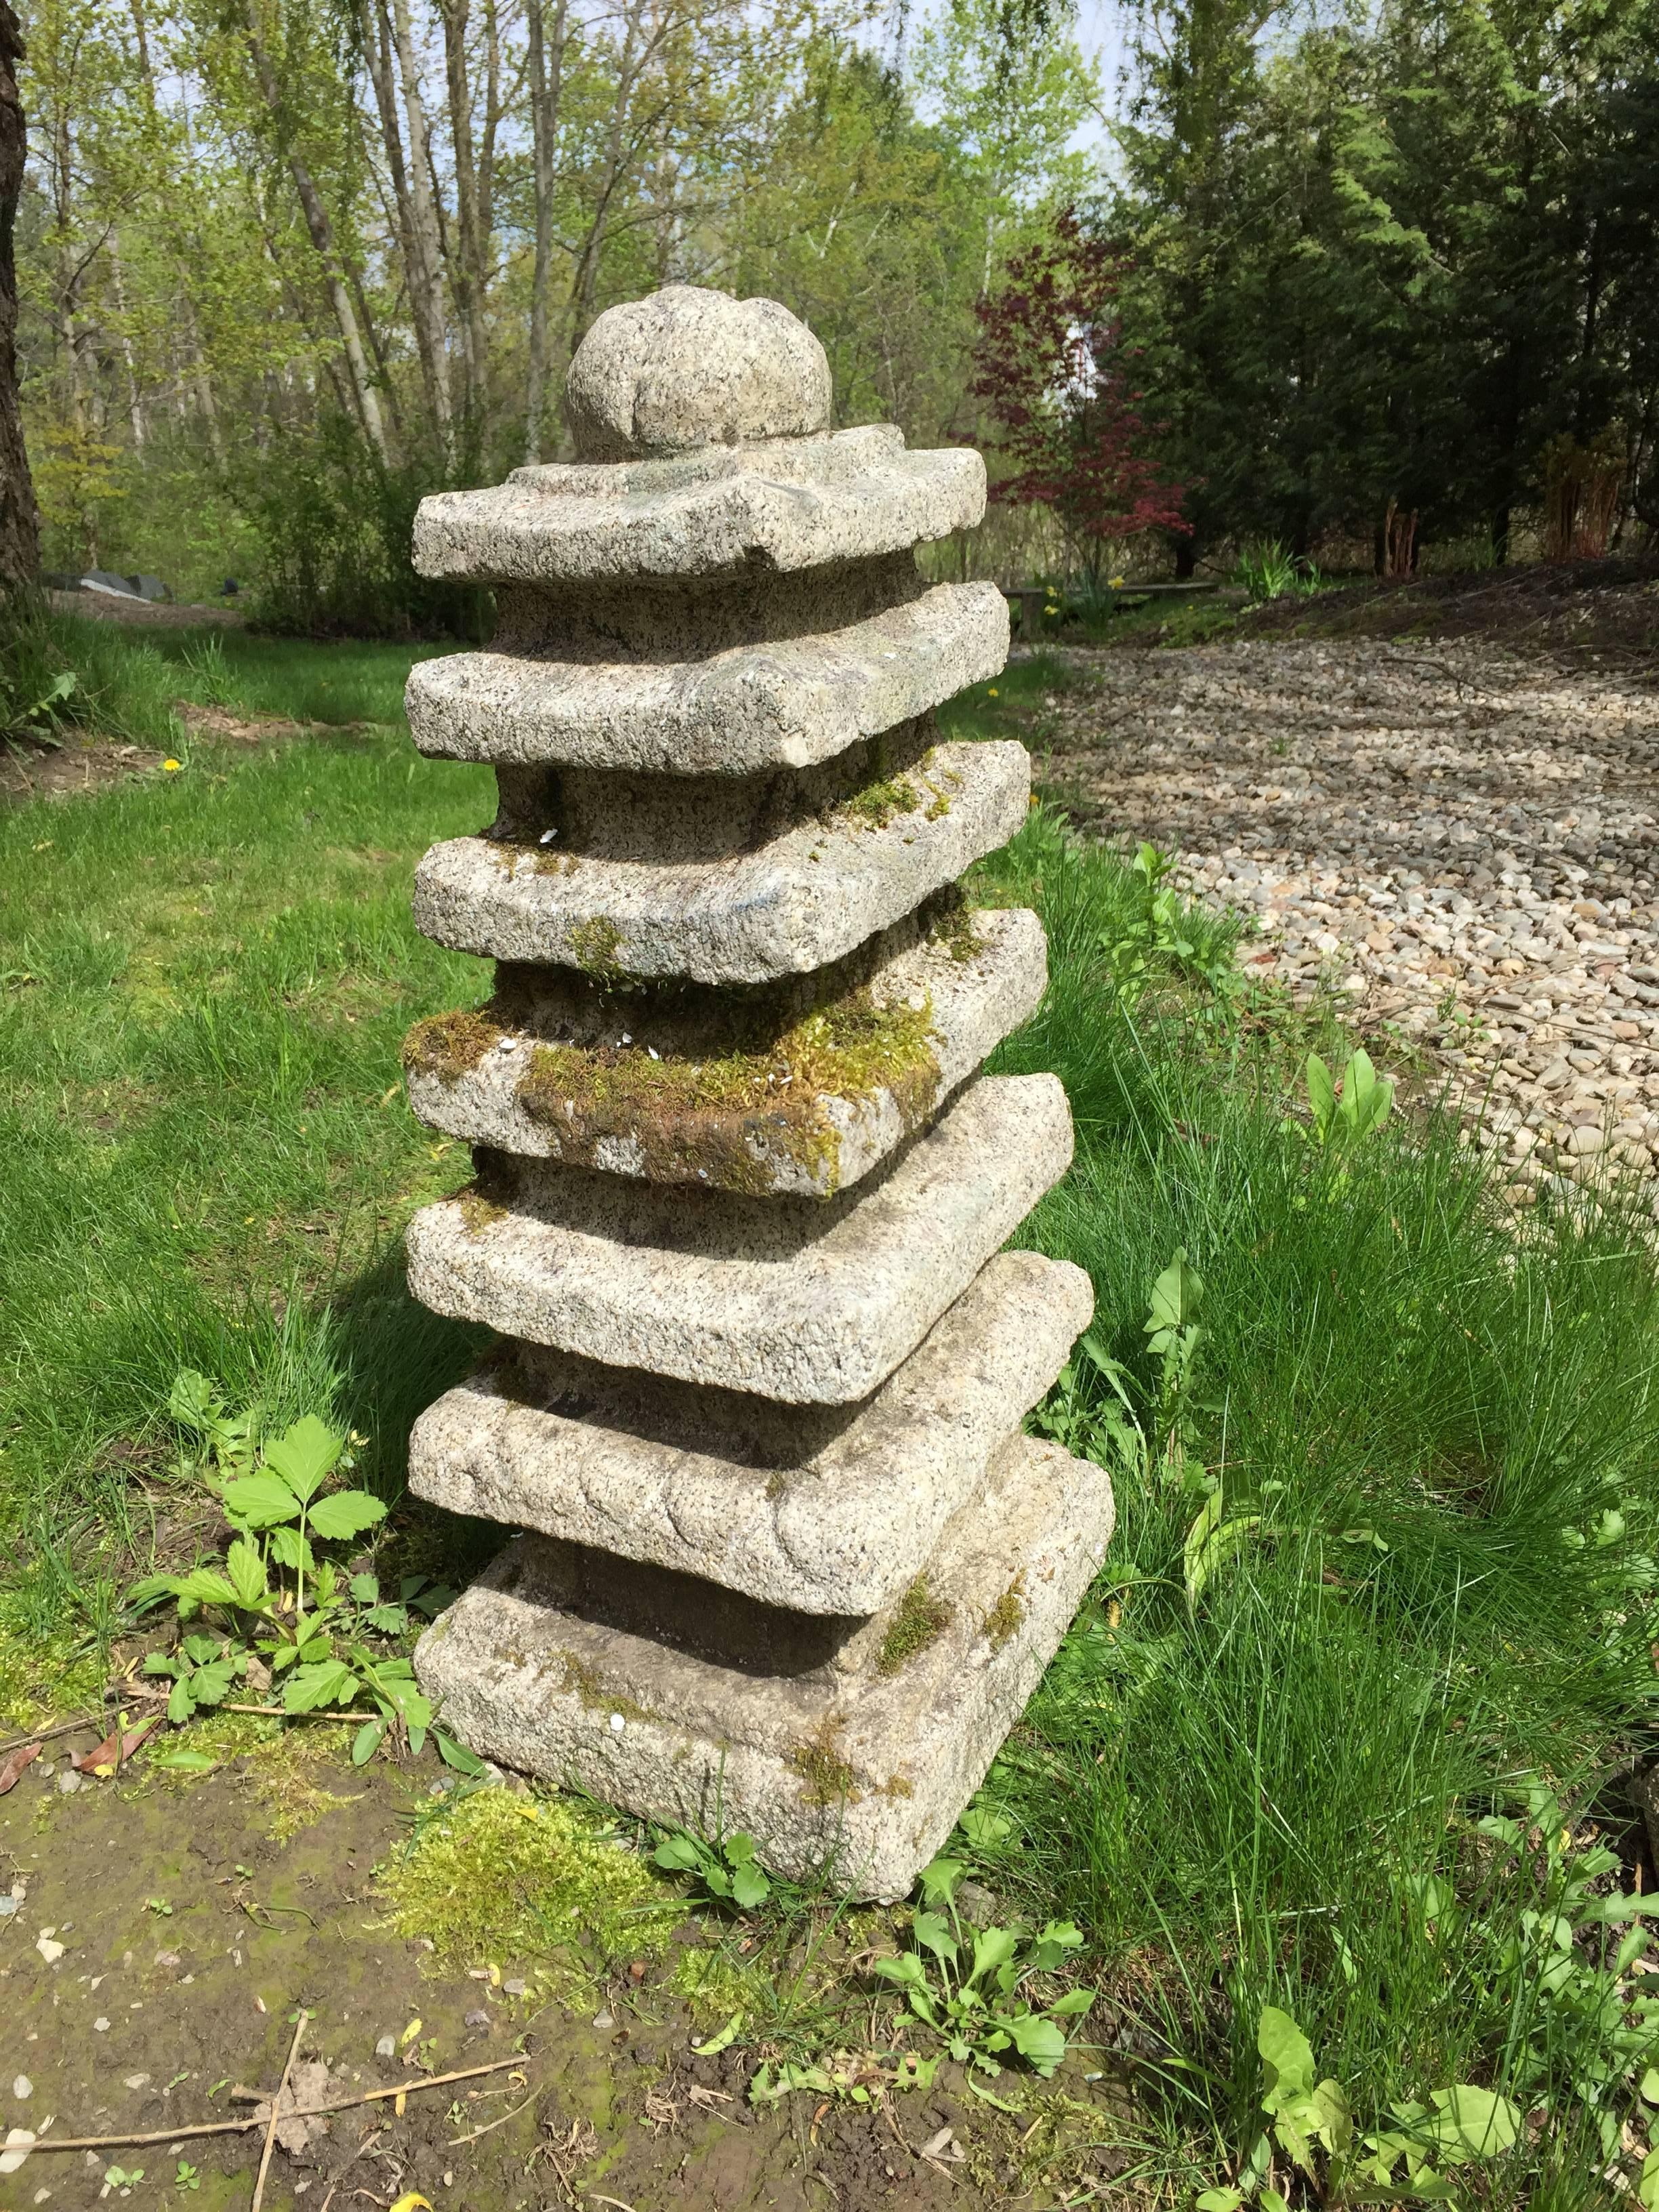 For your special garden

Here's the only hand-carved antique granite stone Korean Pagoda we have had the pleasure of owning- a superb and desirable garden treasure from Korea. 

This is a rare and finely crafted hand-carved seven tiered pagoda